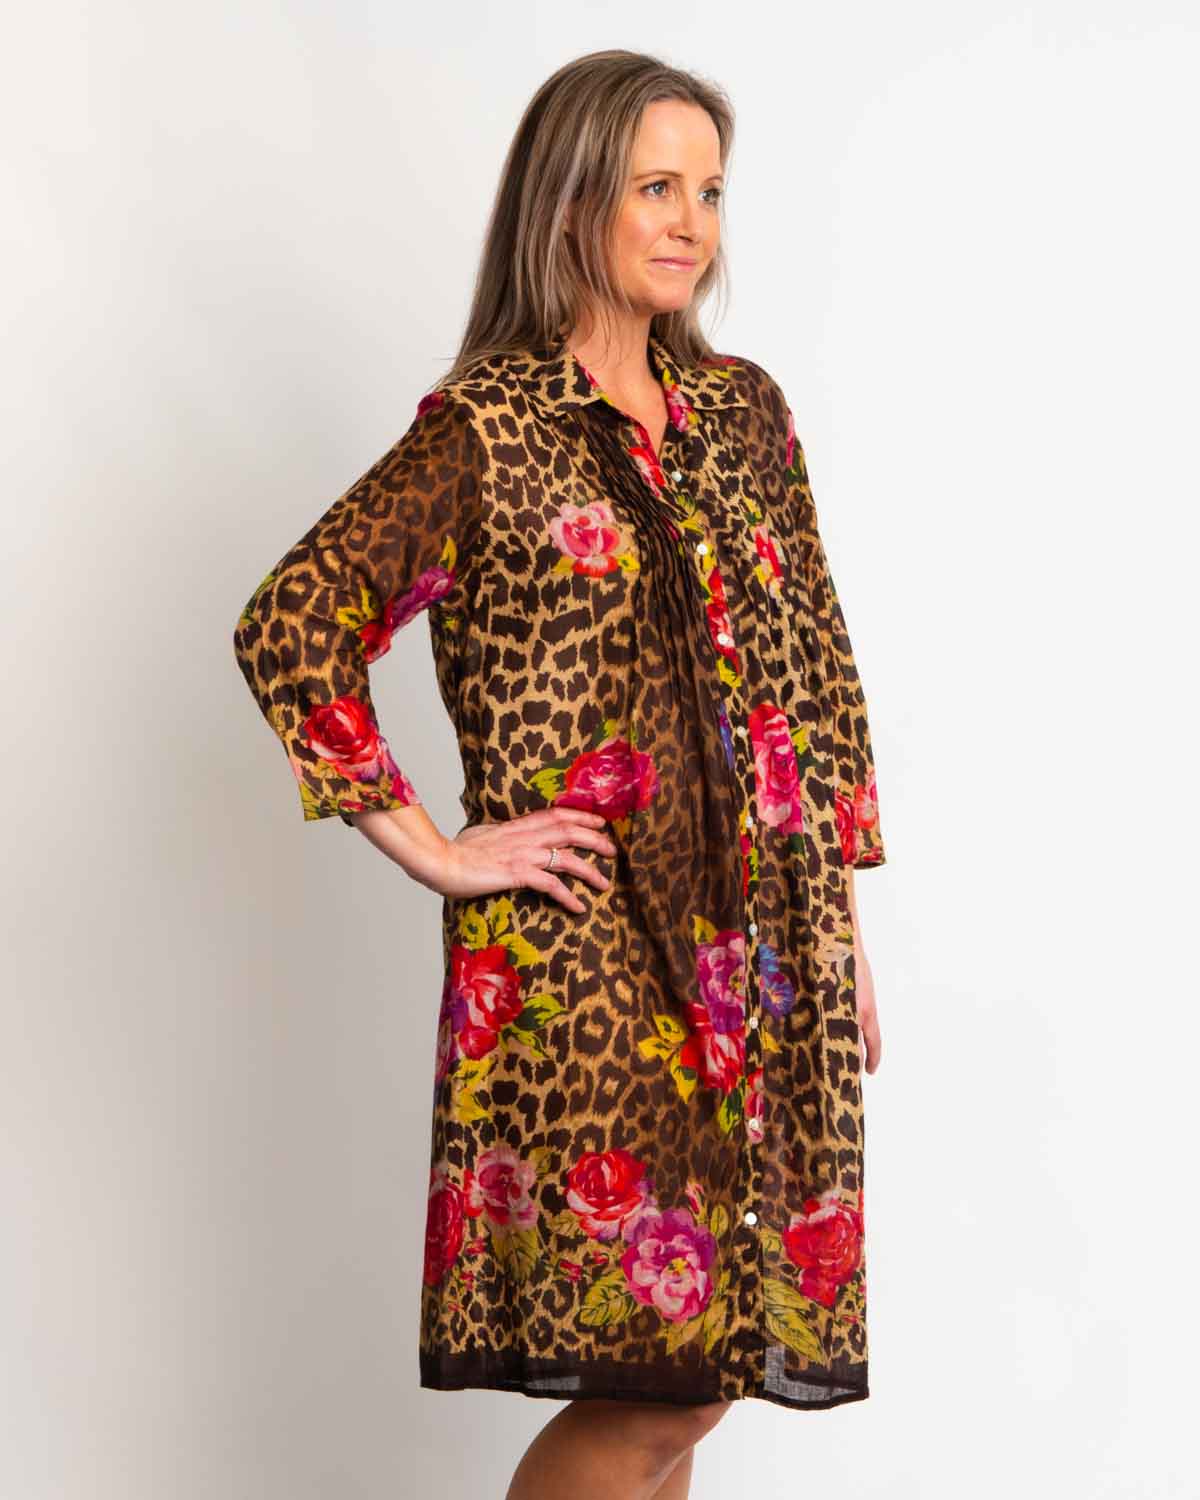 Collared shirt dress in tiger floral